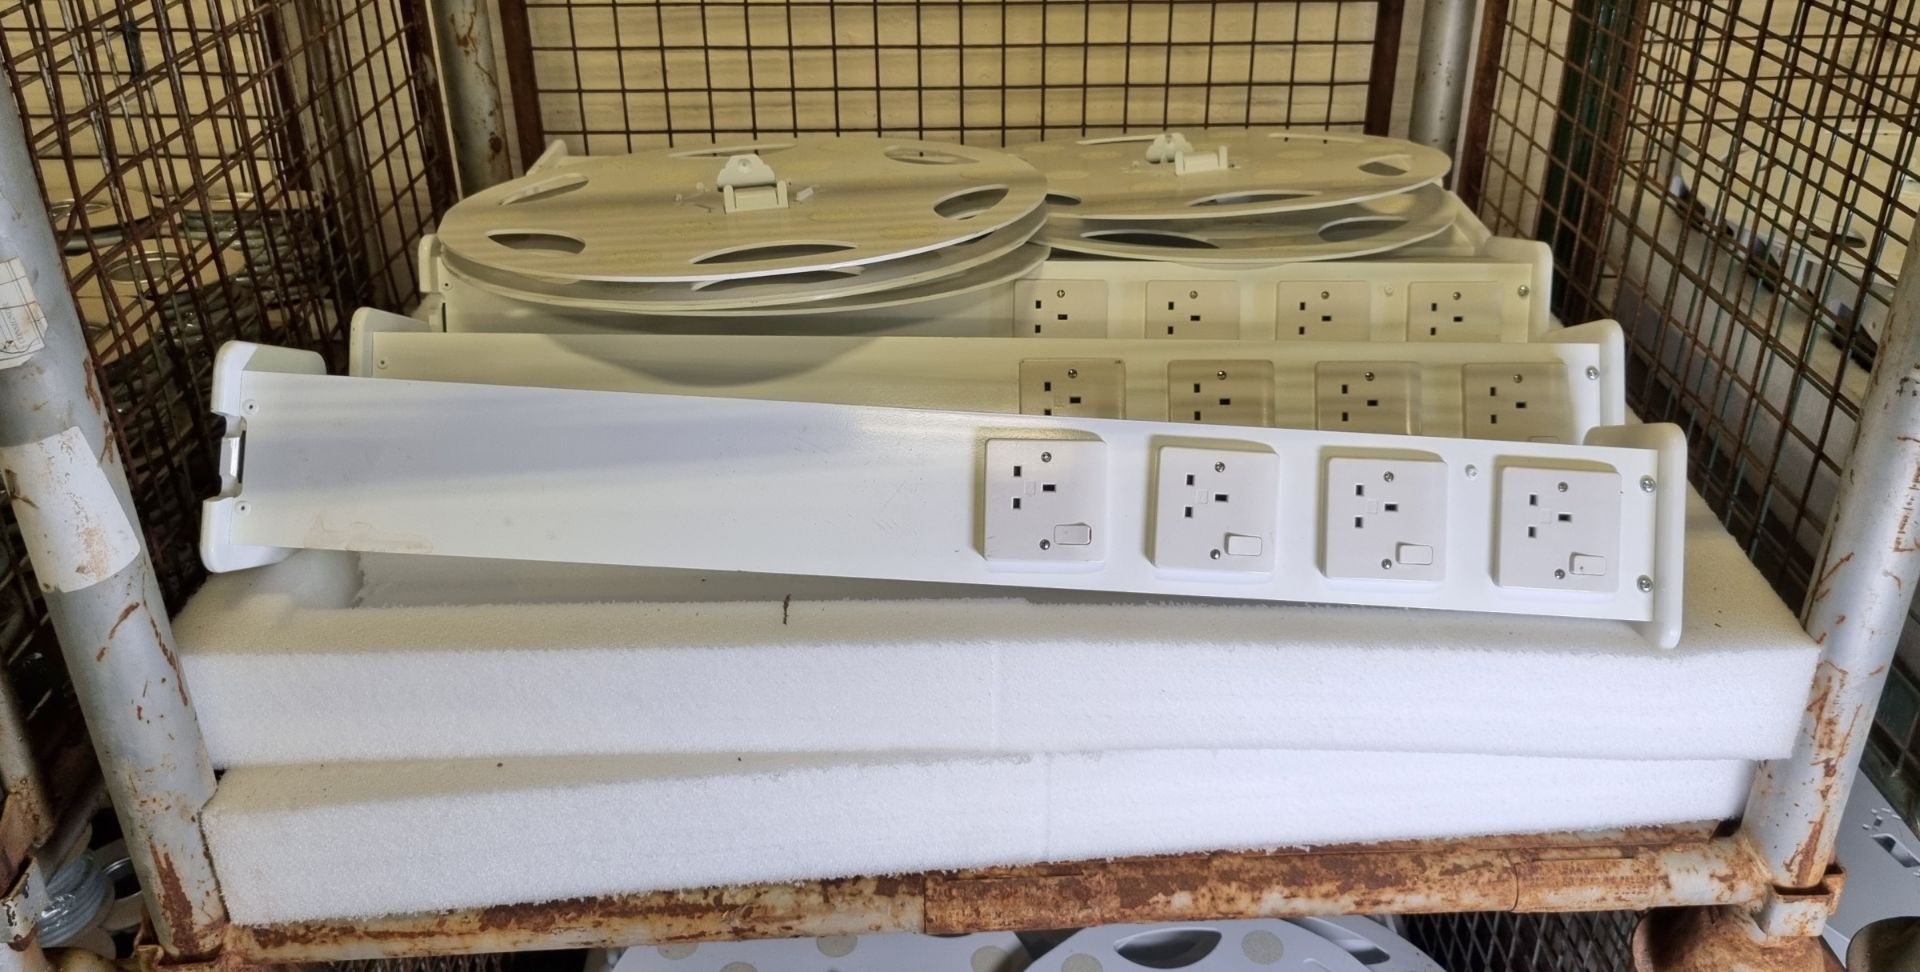 2x Power post Bases with 8 Plug Socket with Surge Protector 240V - Image 2 of 3